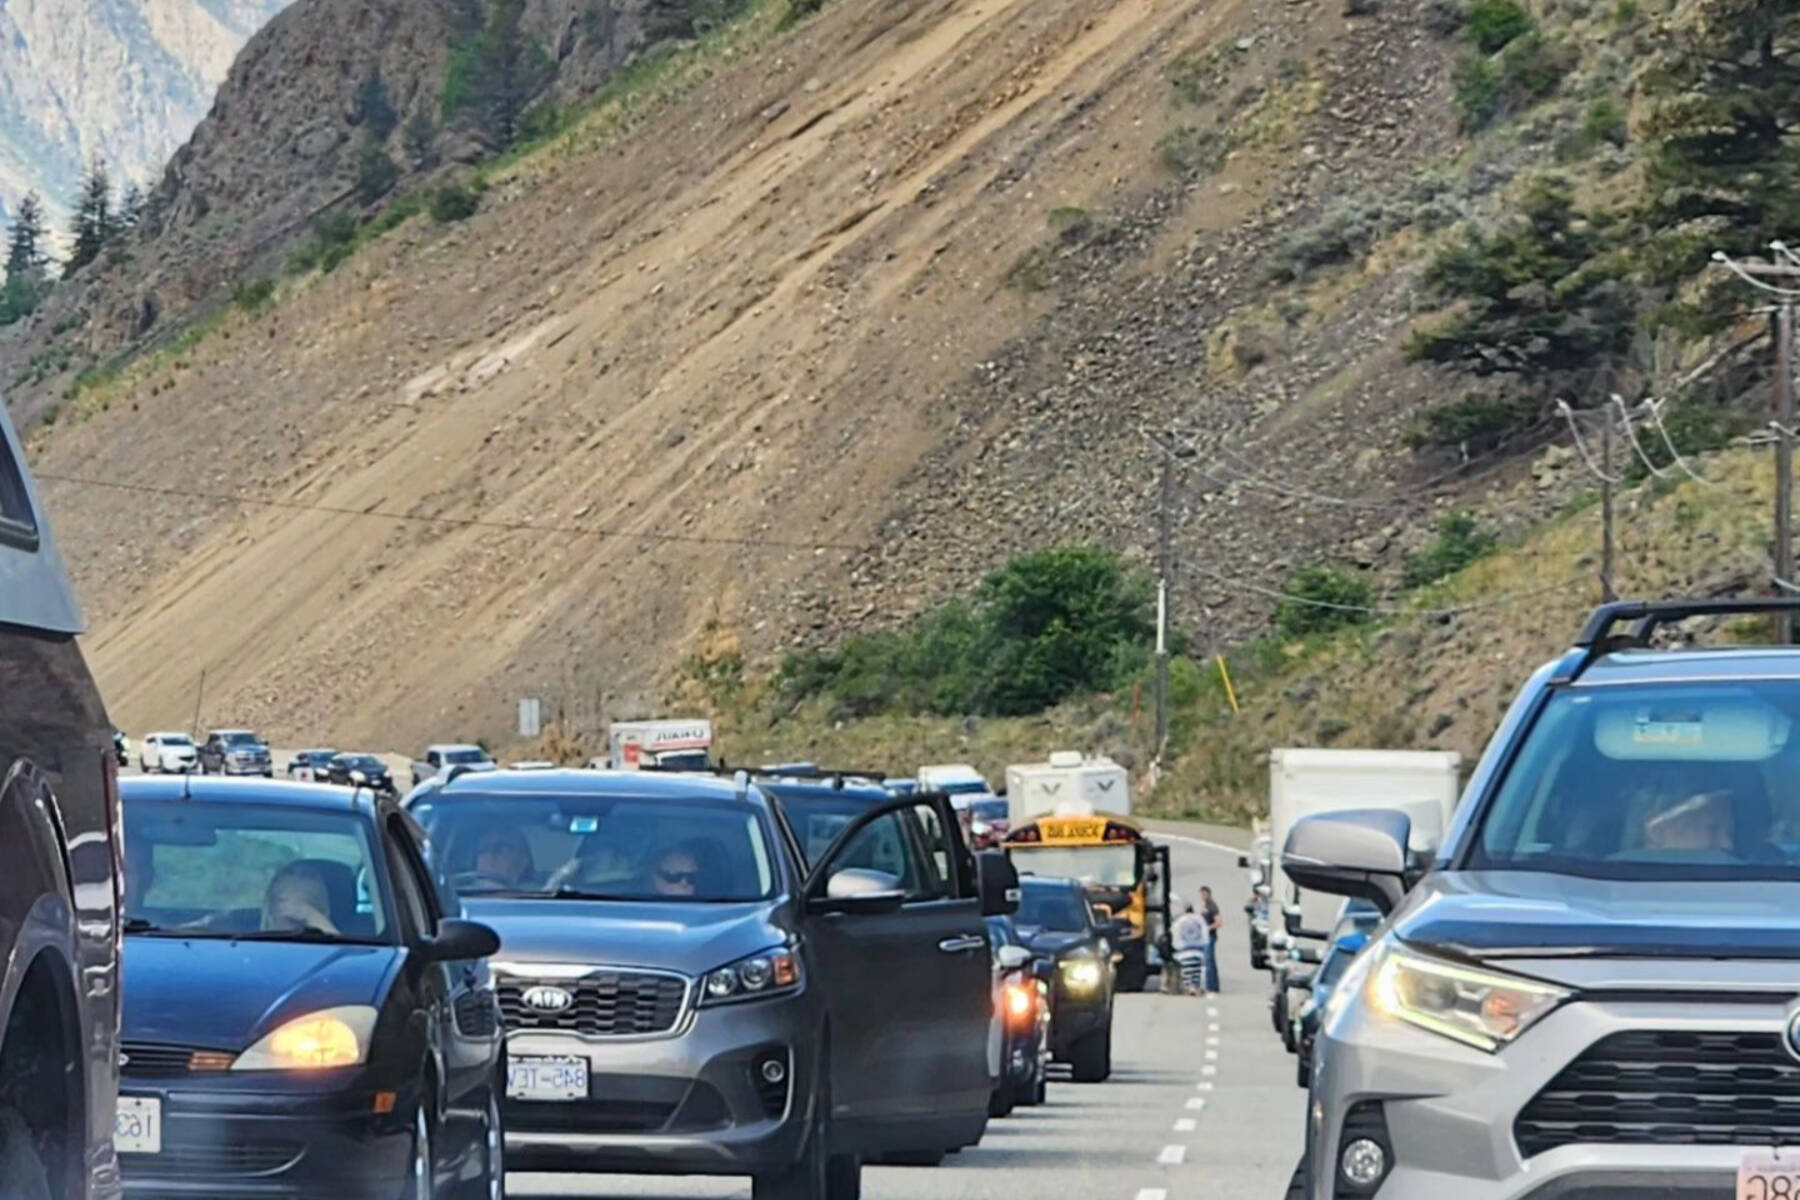 Traffic along Highway 3 was backed up in both directions on May 15 while emergency crews recovered a vehicle and two deceased occupants from the Similkameen River. (Spencer Coyne - Facebook)